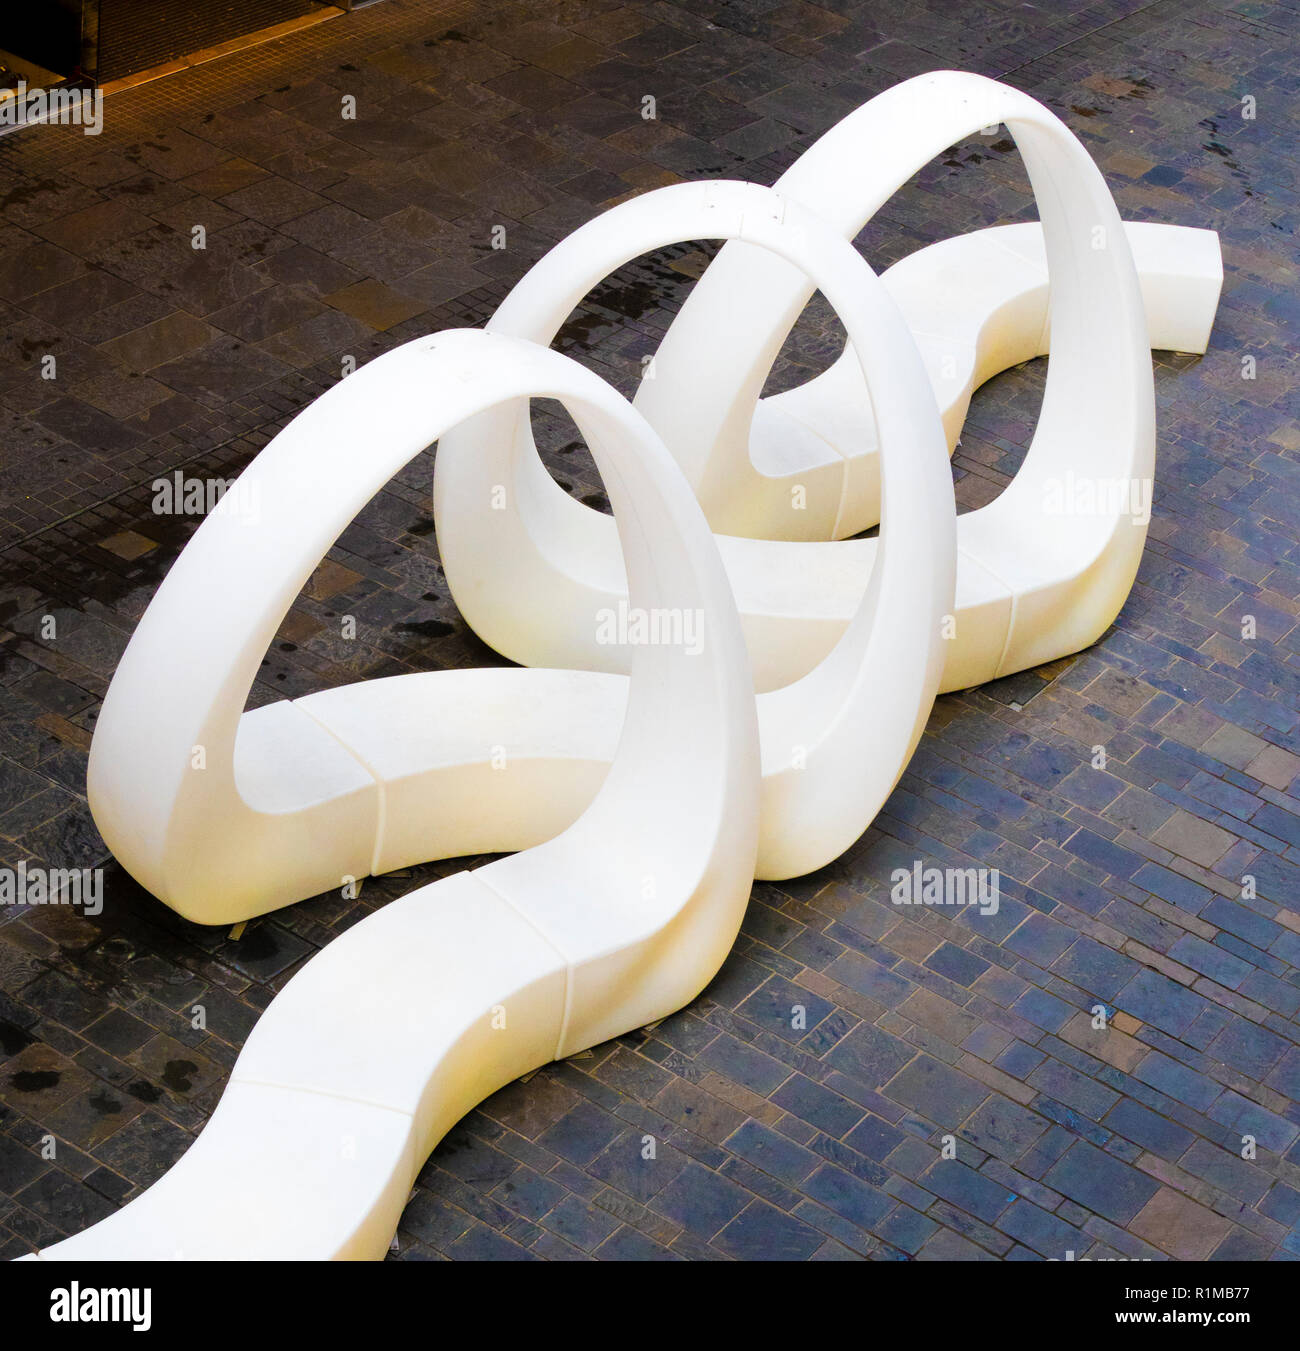 A Form of public seating in a shopping precinct. Interesting twisted and looped shape on a tiled floor viewed from above in Cabot Circus Bristol UK Stock Photo